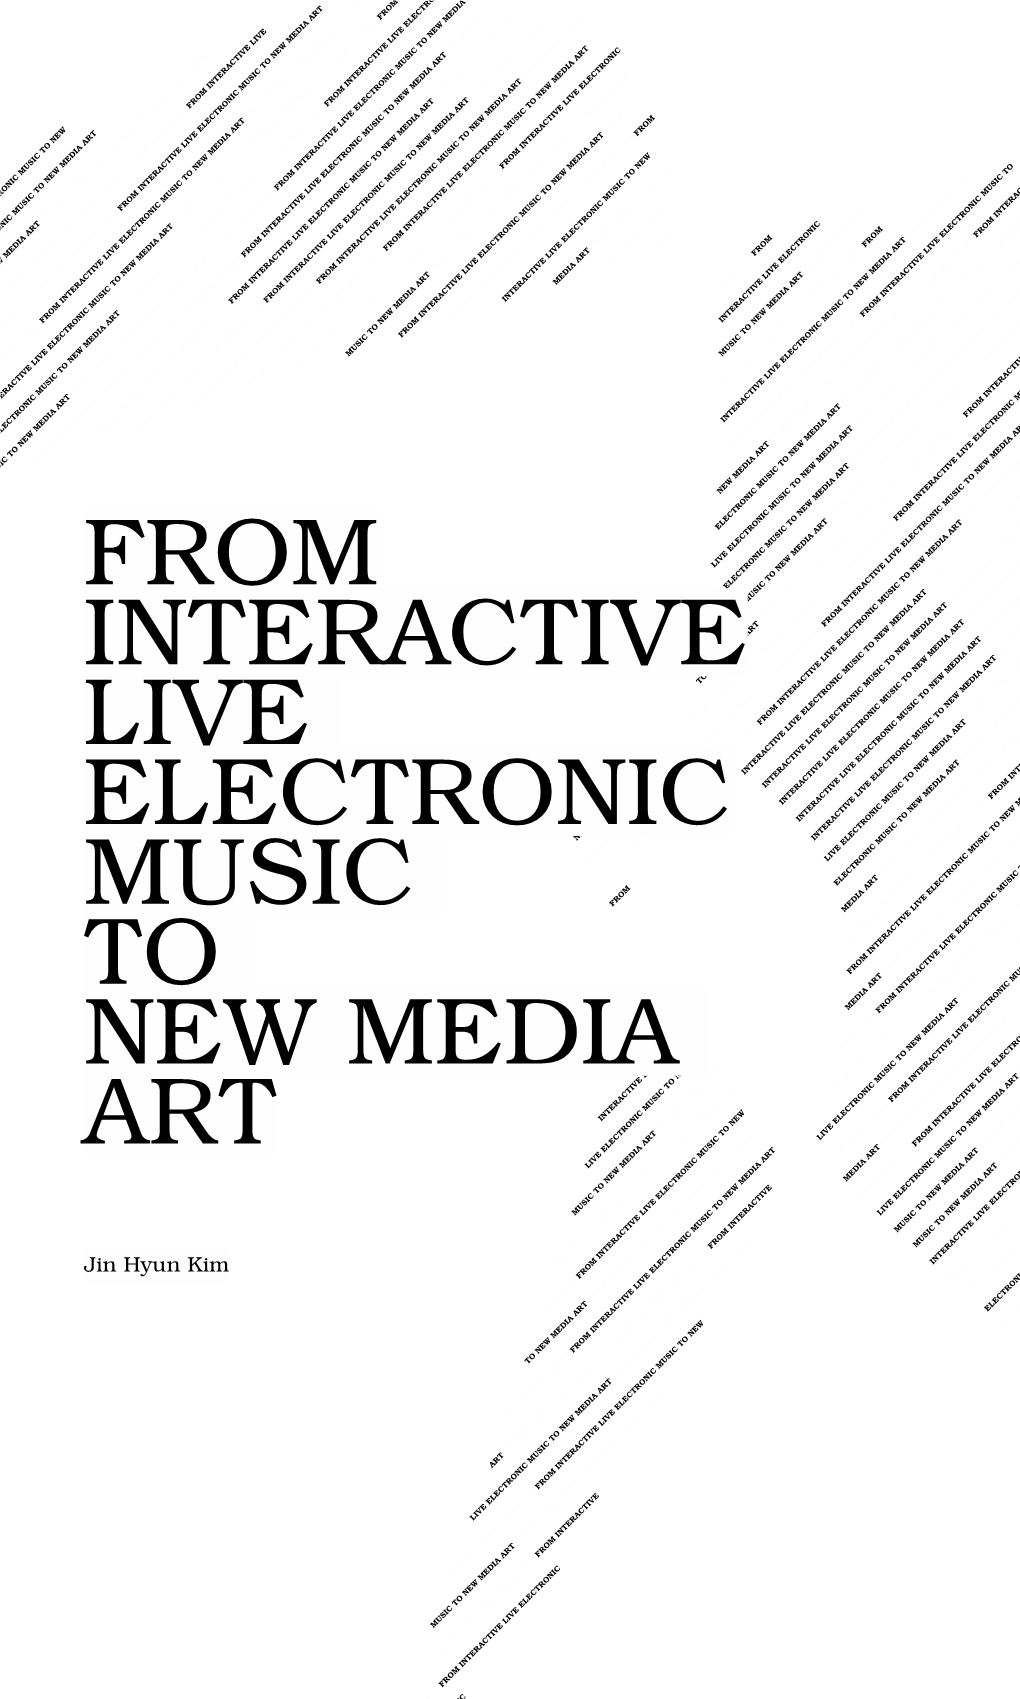 From Interactive Live Electronic Music to New Media Art